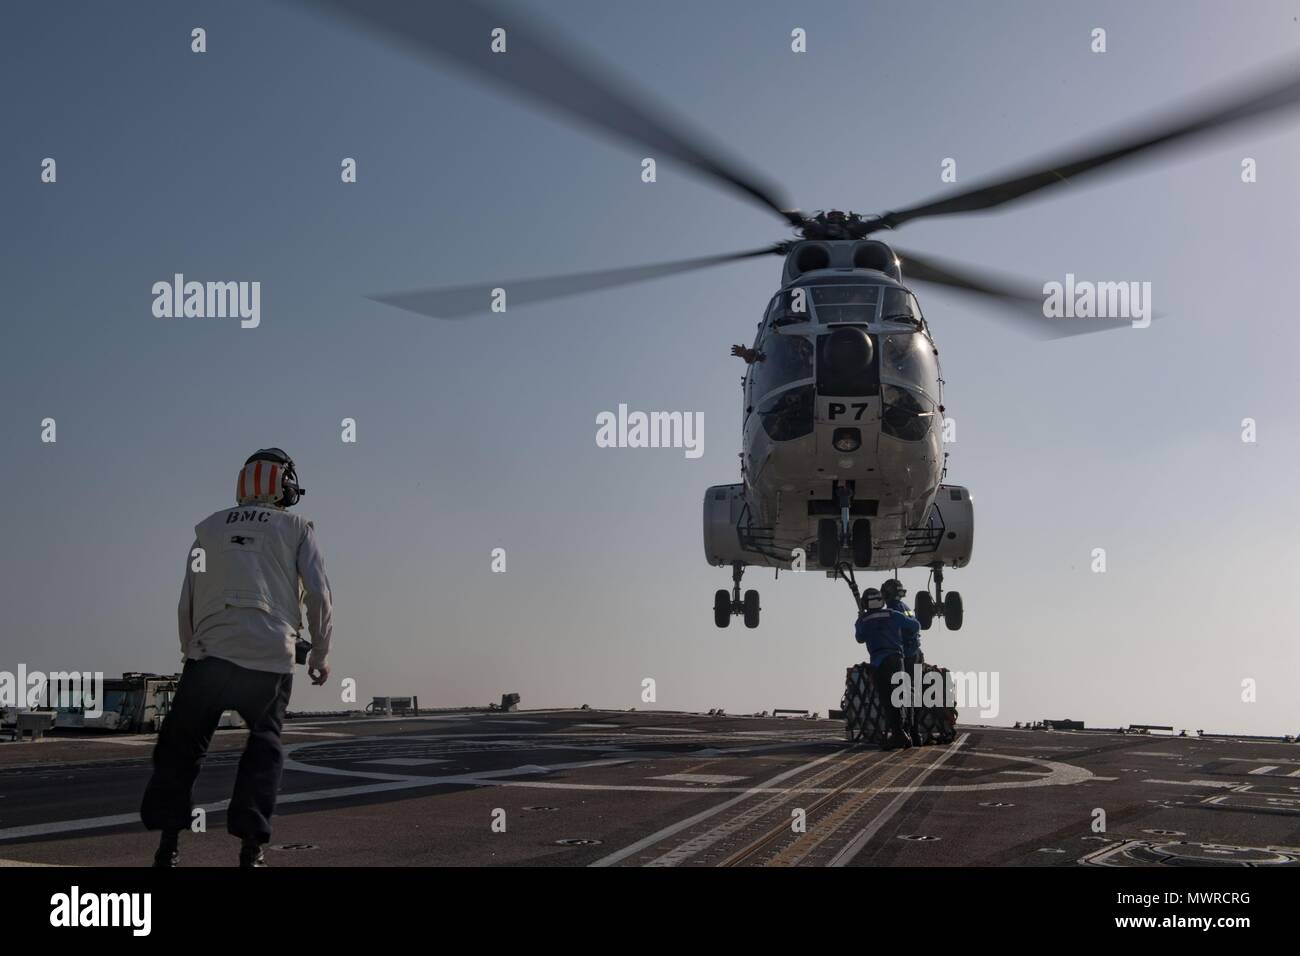 180510-N-AV754-0172 U.S. 5TH FLEET AREA OF OPERATIONS (May 10, 2018) Sailors assigned to the Arleigh Burke-class guided-missile destroyer USS Winston S. Churchill (DDG 81) attached cargo to a Eurocopter AS332 Super Puma helicopter during a vertical replenishment with the dry cargo and ammunition ship USNS Amelia Earhart (T-AKE 6). Winston S. Churchill is deployed to the U.S. 5th Fleet area of operations in support of maritime security operations to reassure allies and partners and preserve the freedom of navigation and the free flow of commerce in the region. (U.S. Navy photo by Mass Communica Stock Photo